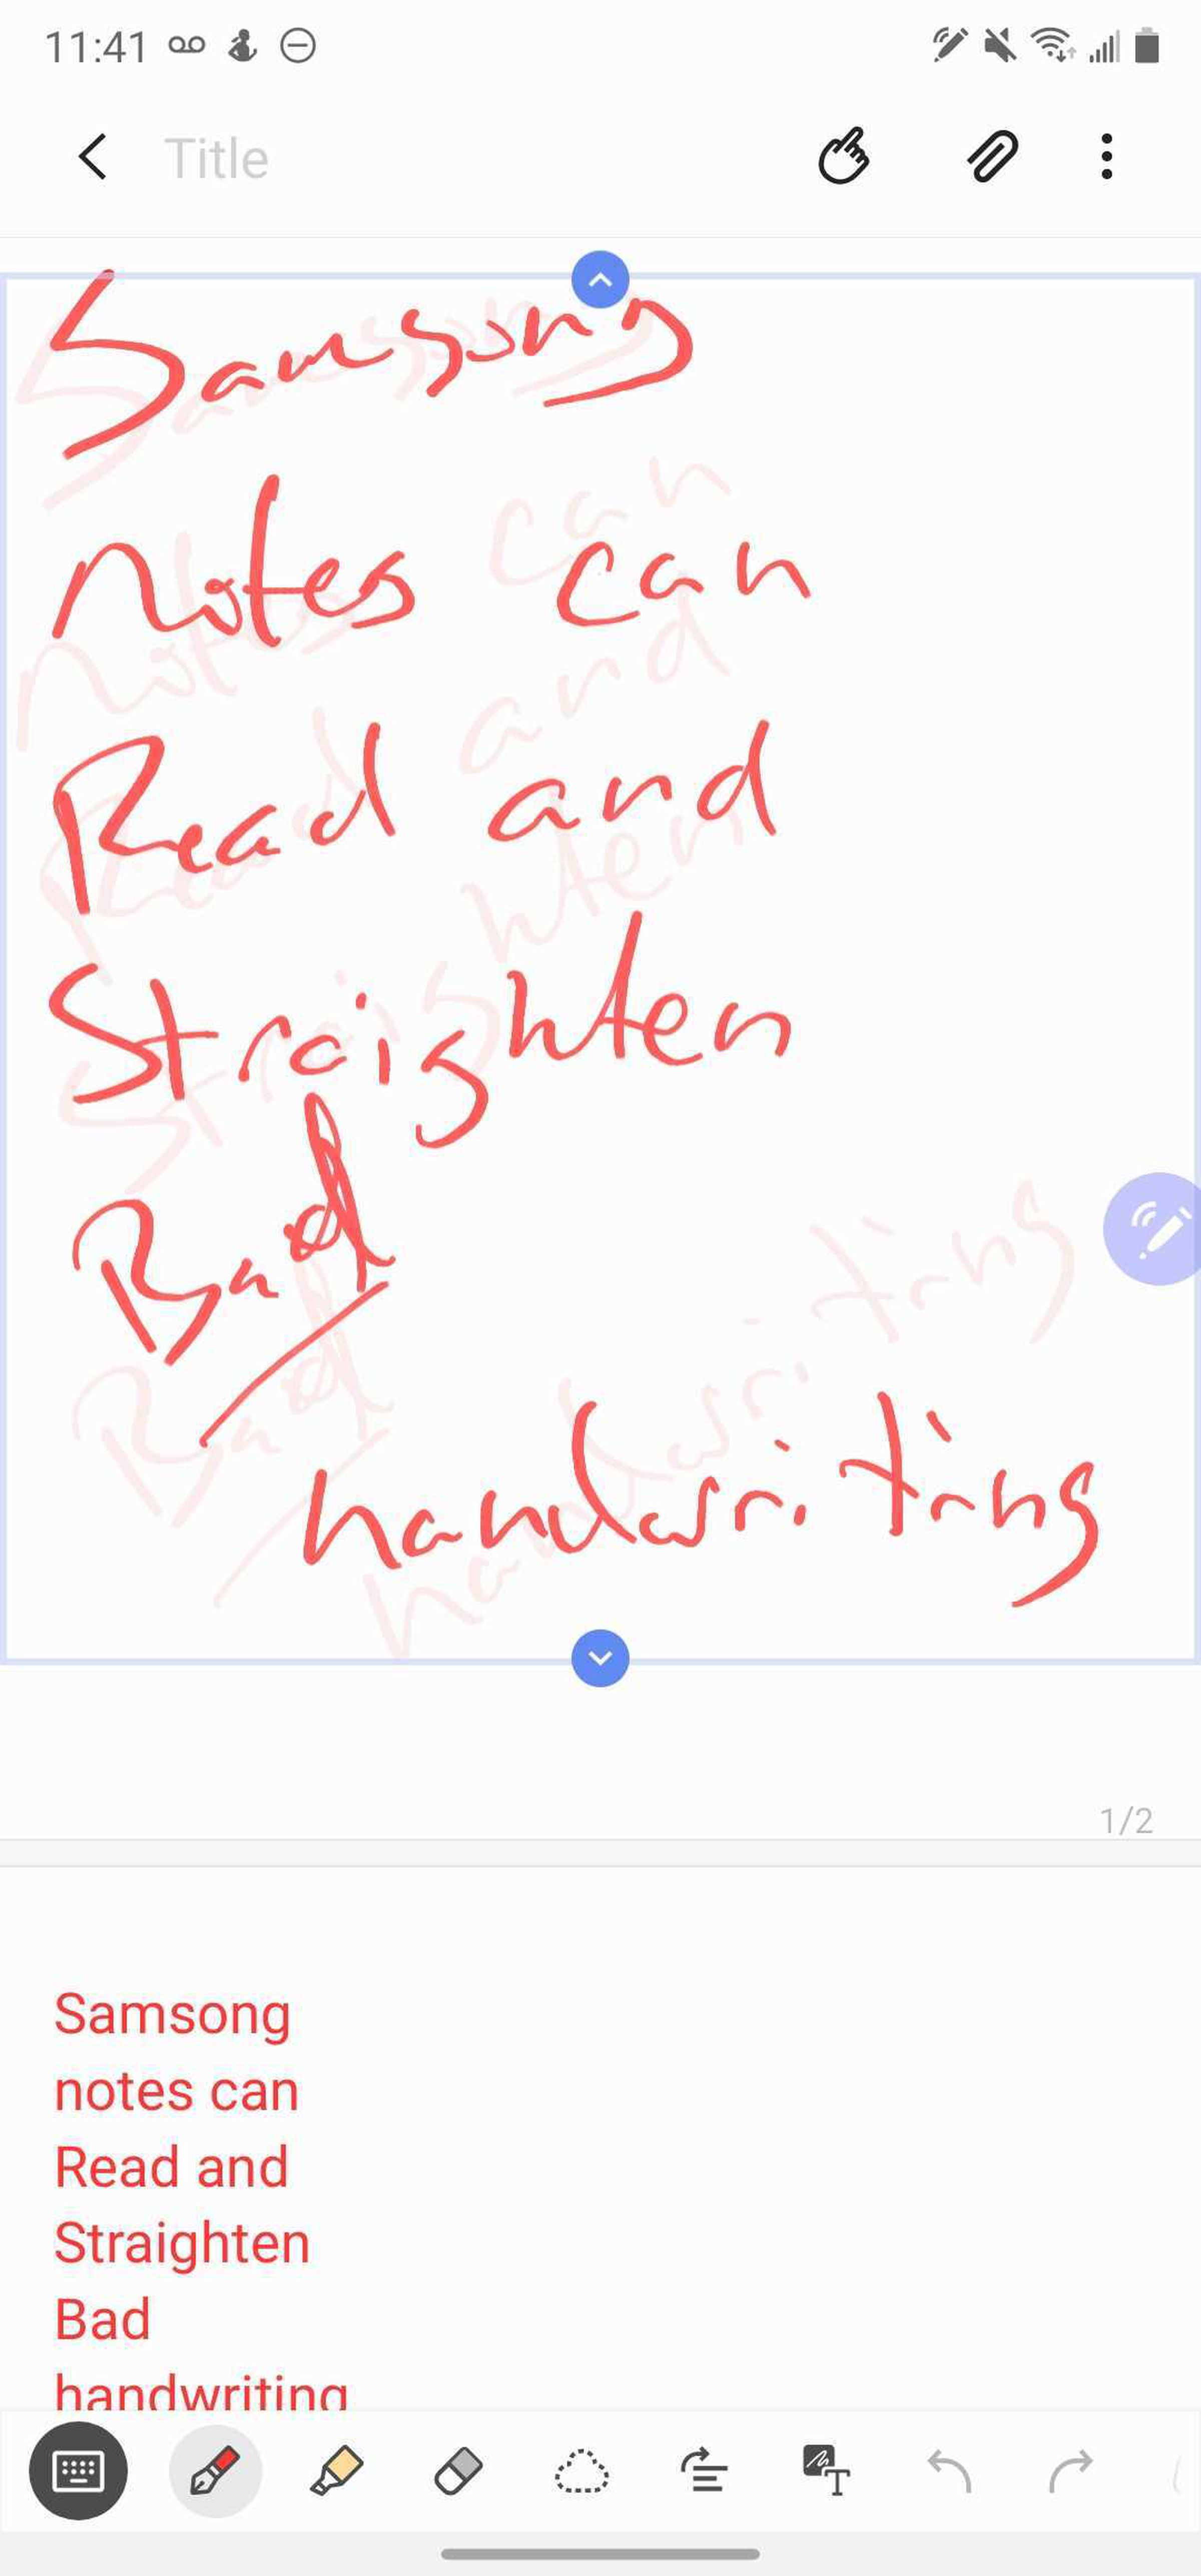 Samsung Notes can re-align your handwriting, convert it to text, and play back audio from the moment you wrote it.